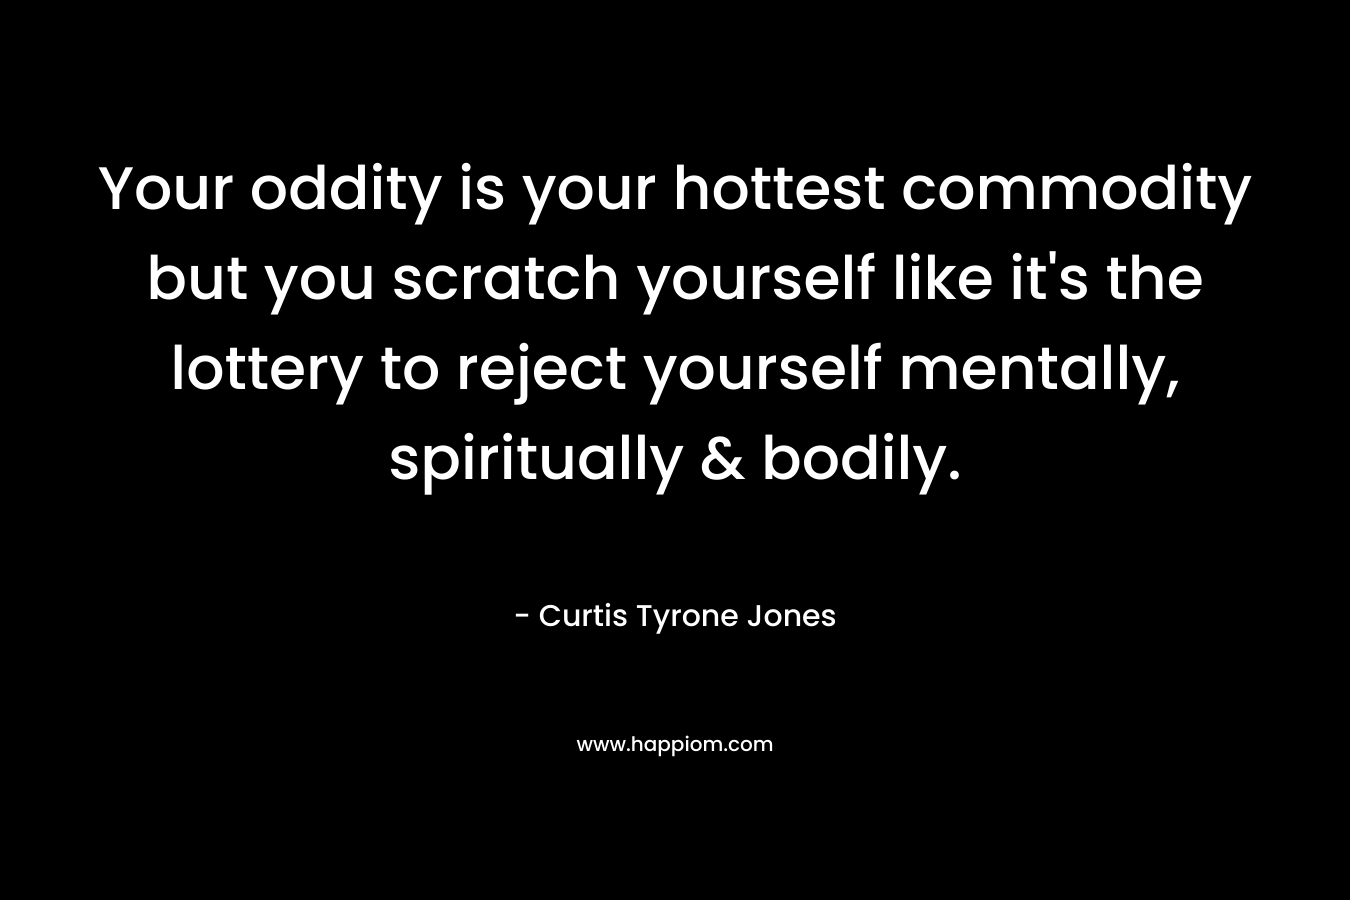 Your oddity is your hottest commodity but you scratch yourself like it's the lottery to reject yourself mentally, spiritually & bodily.